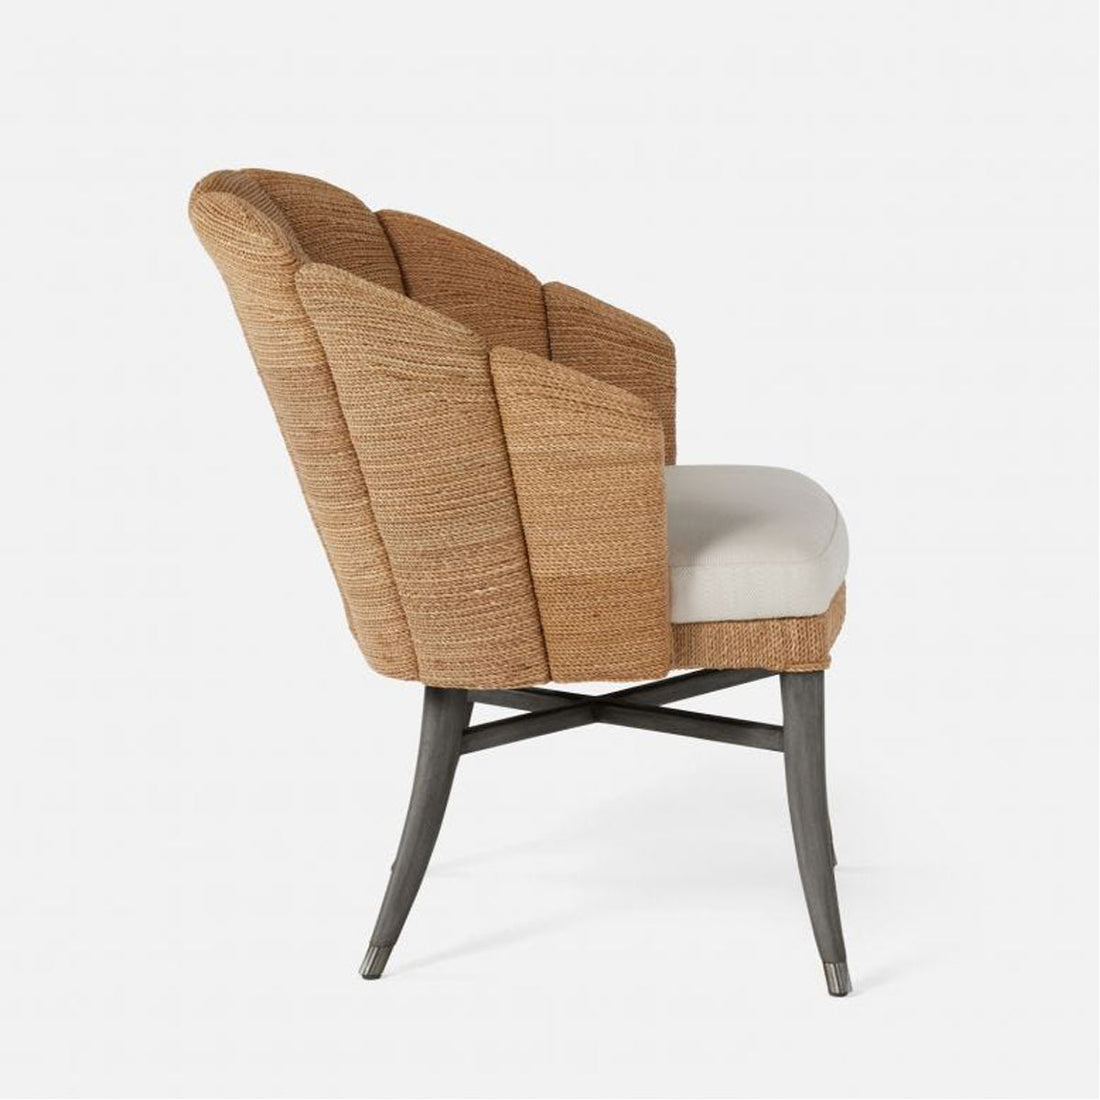 Made Goods Vivaan Shell Upholstered Dining Chair, Colorado Leather